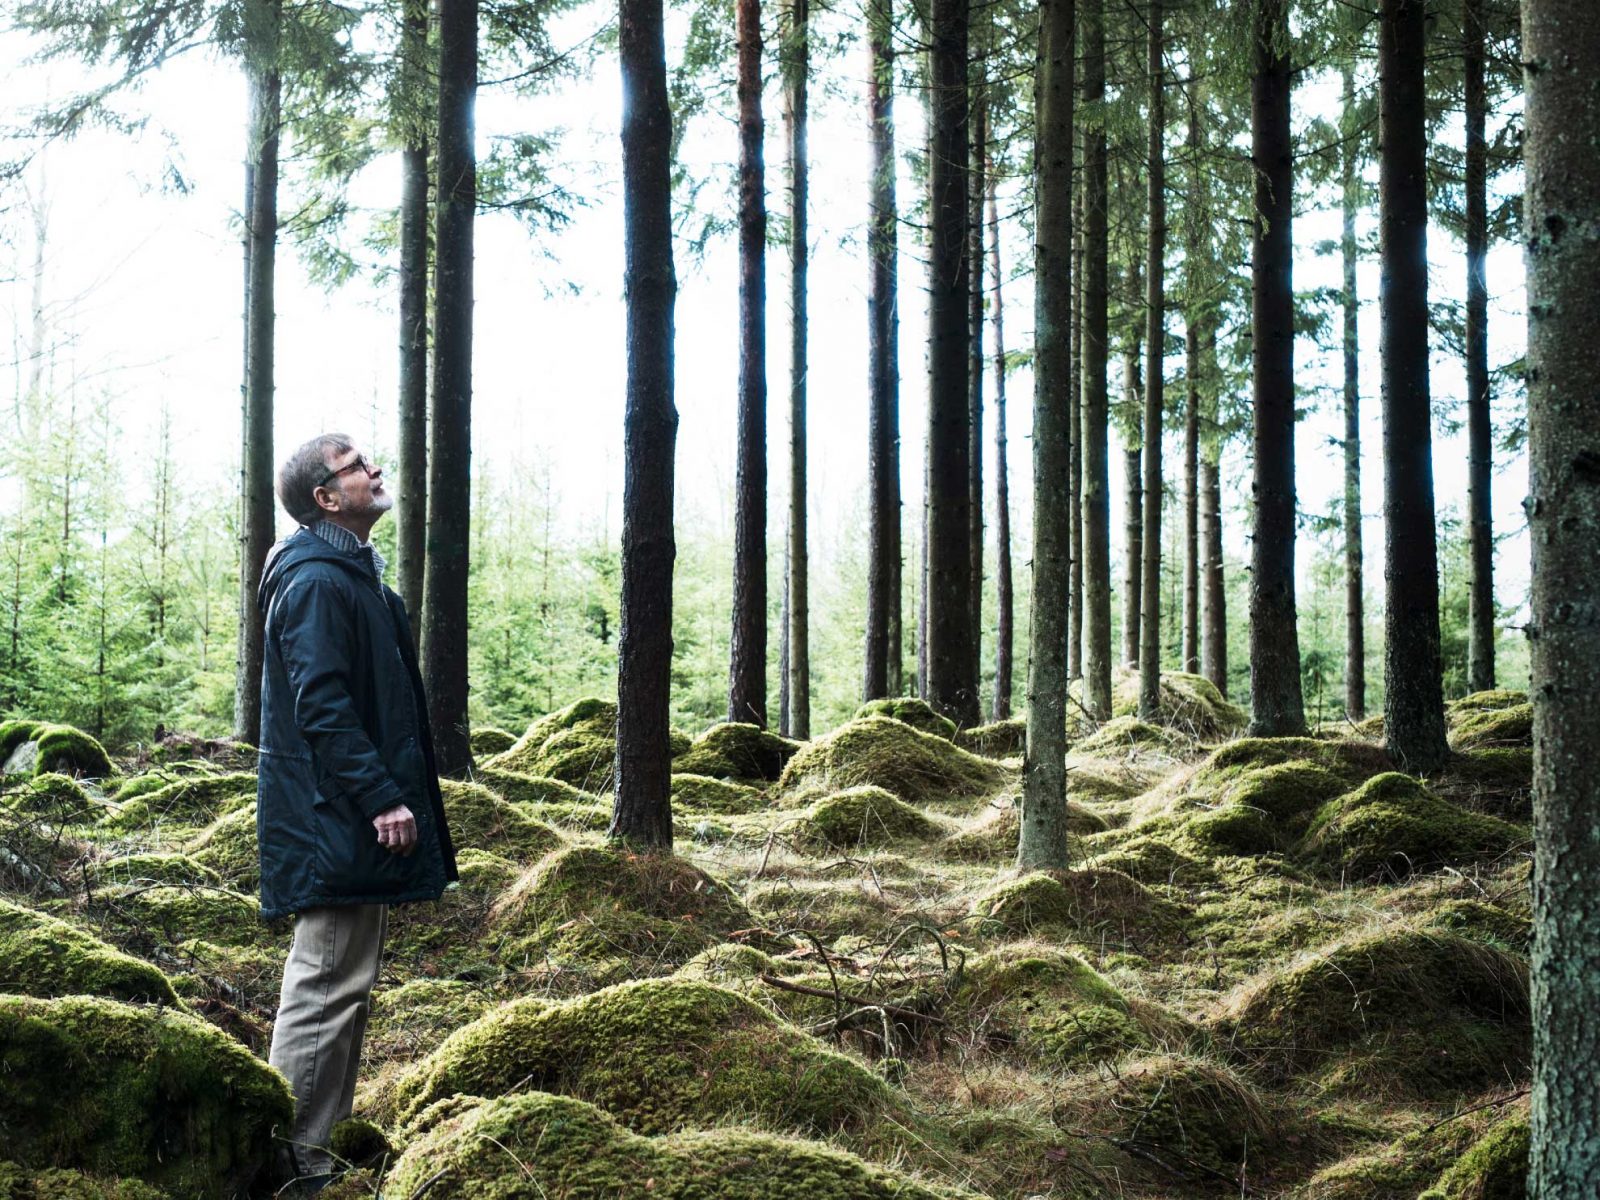 Grey-haired man in glasses and dark coat stands in a pine forest on ground covered with moss and looks up at the treetops.